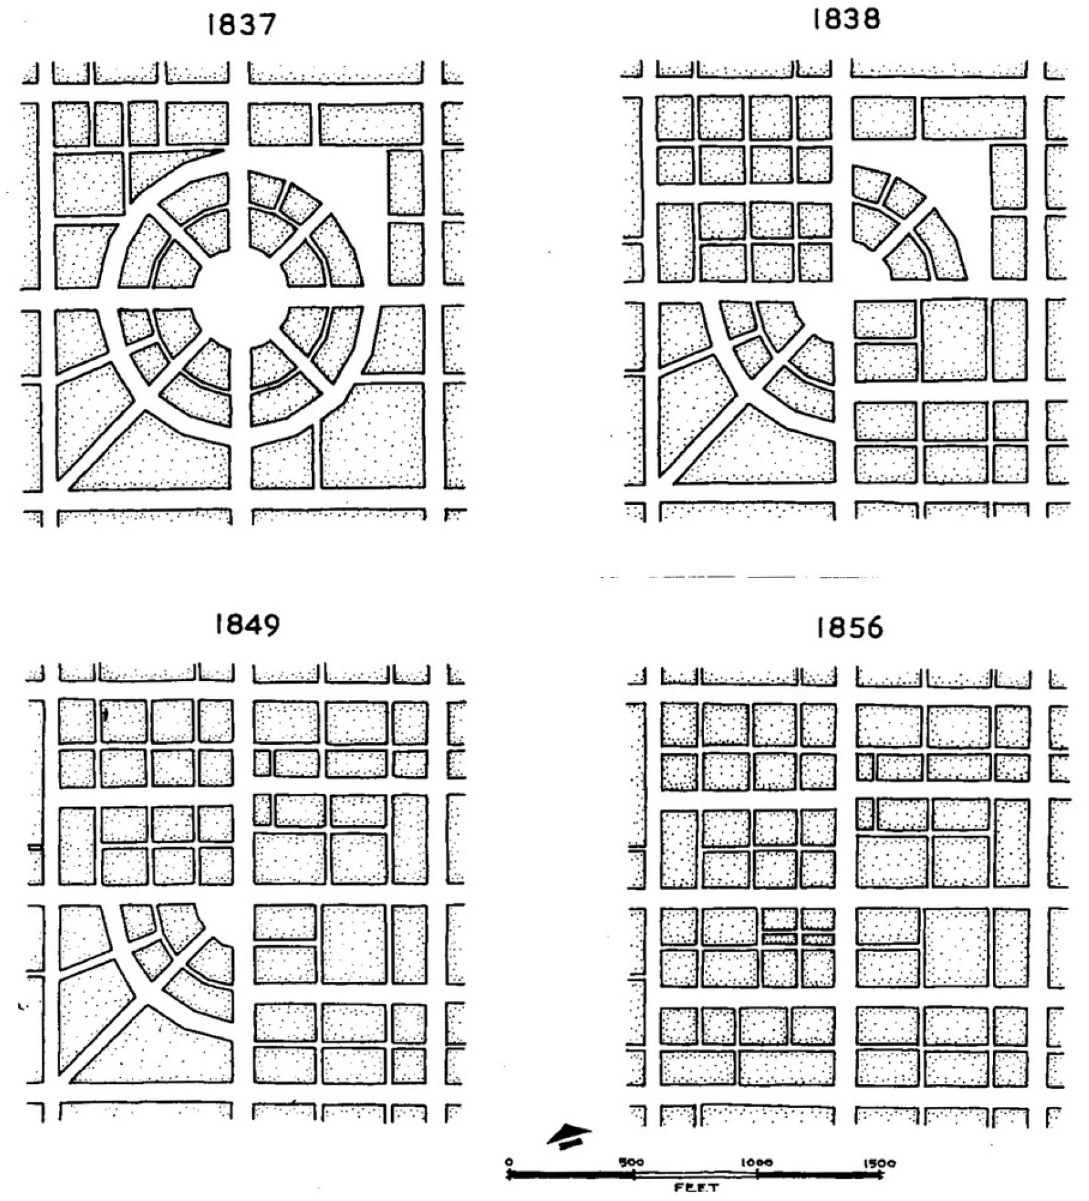 Four diagrams showing the urban development plans of a city at different years: 1837, 1838, 1849, and 1856.